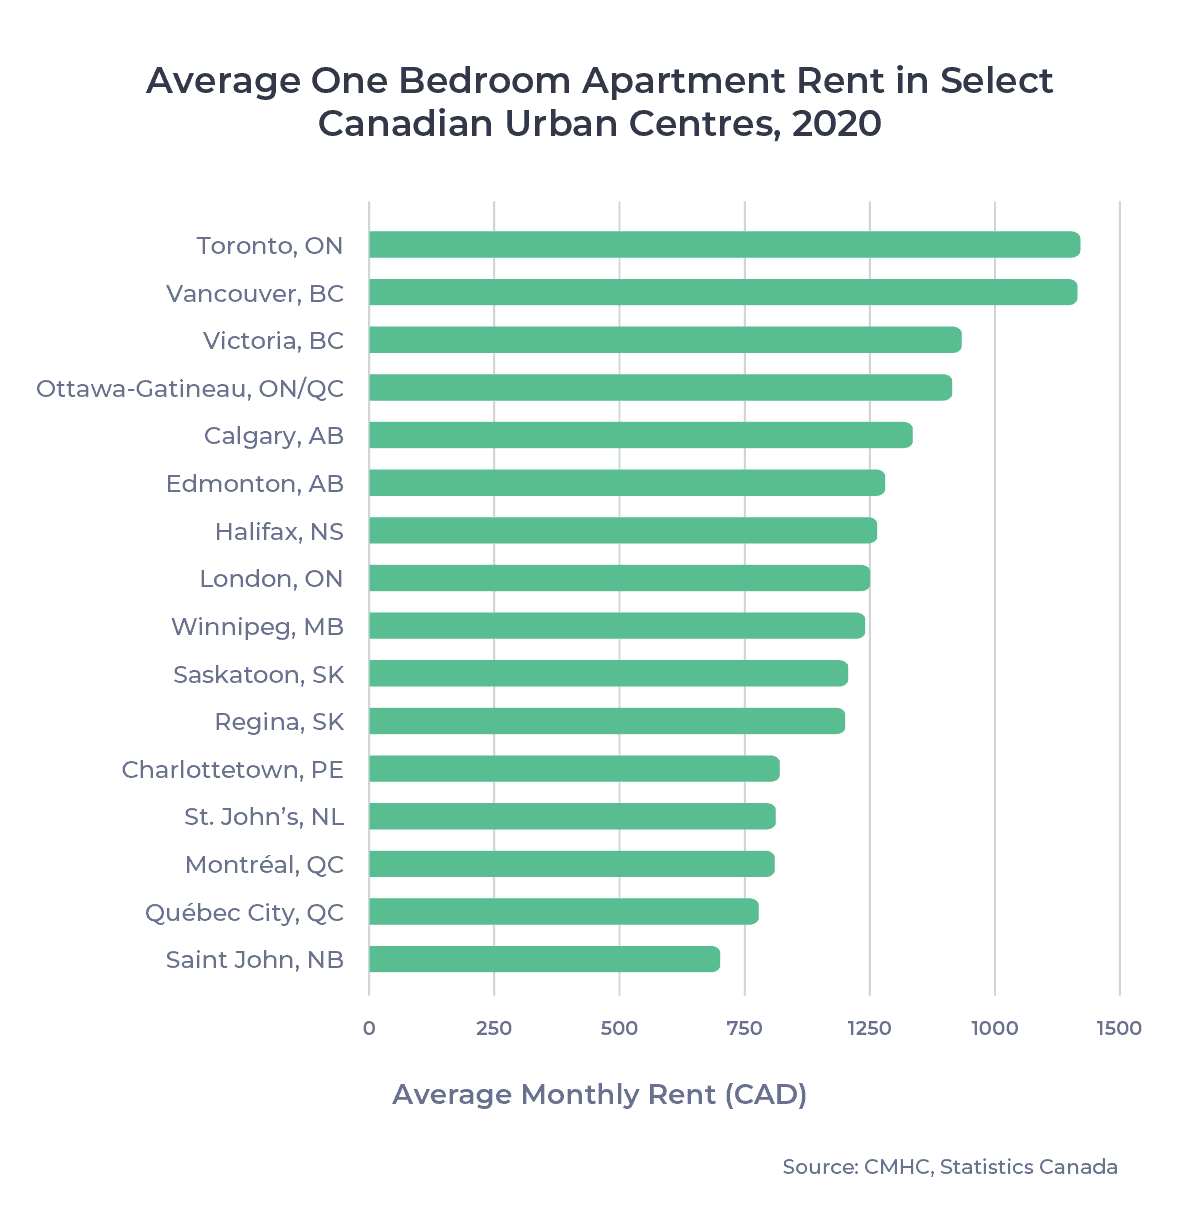 Bar chart of average one bedroom apartment rent in select Canadian urban centres, 2020